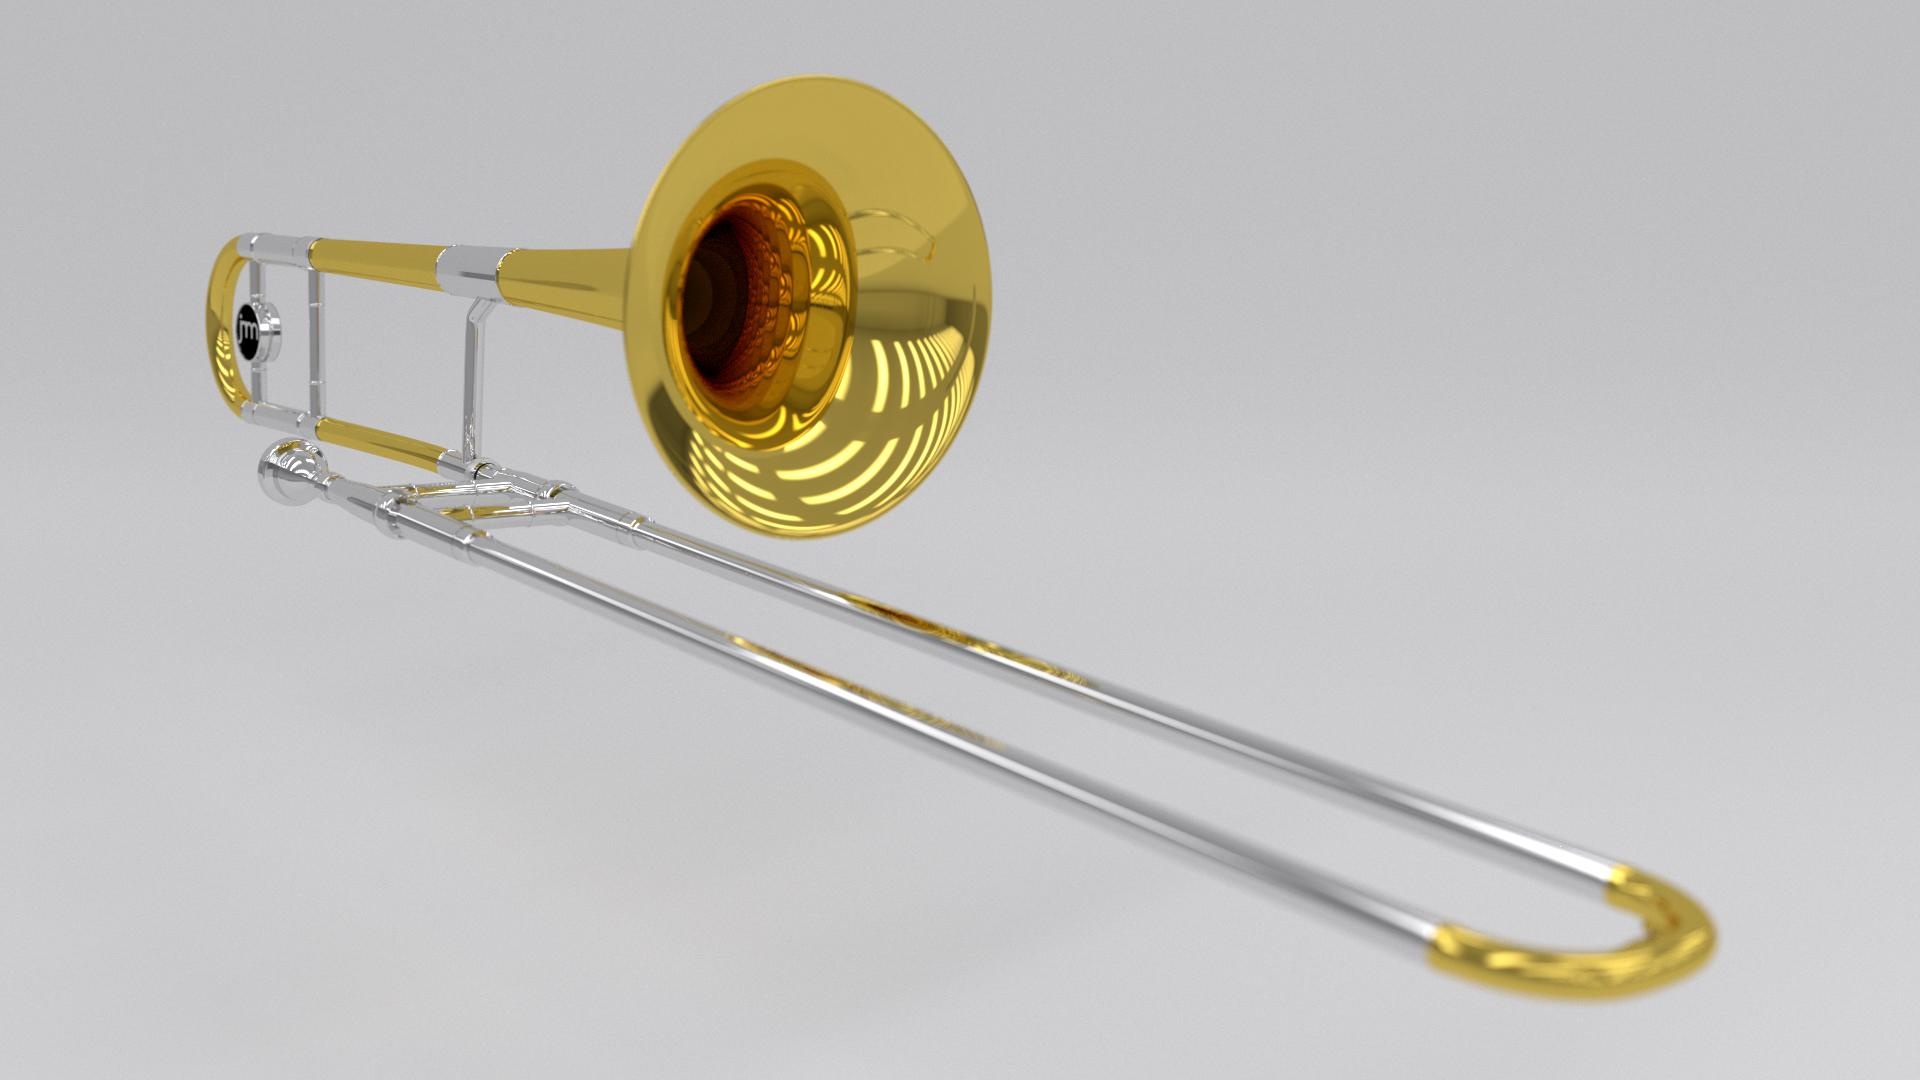 Trombone: A large musical instrument of the brass family, A low-pitched counterpart of the trumpet. 1920x1080 Full HD Background.